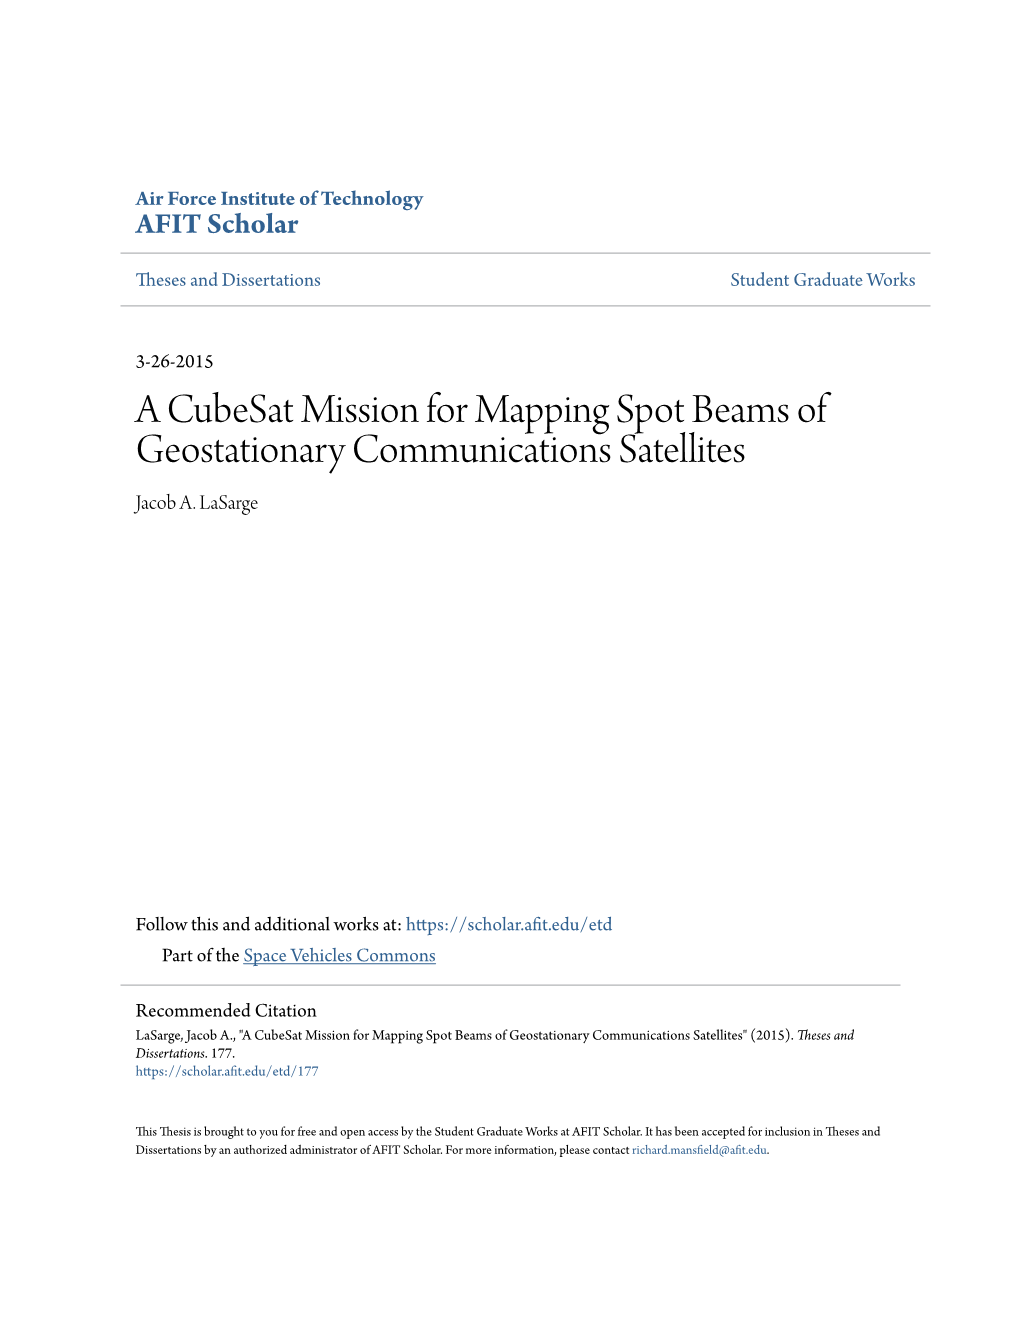 A Cubesat Mission for Mapping Spot Beams of Geostationary Communications Satellites Jacob A